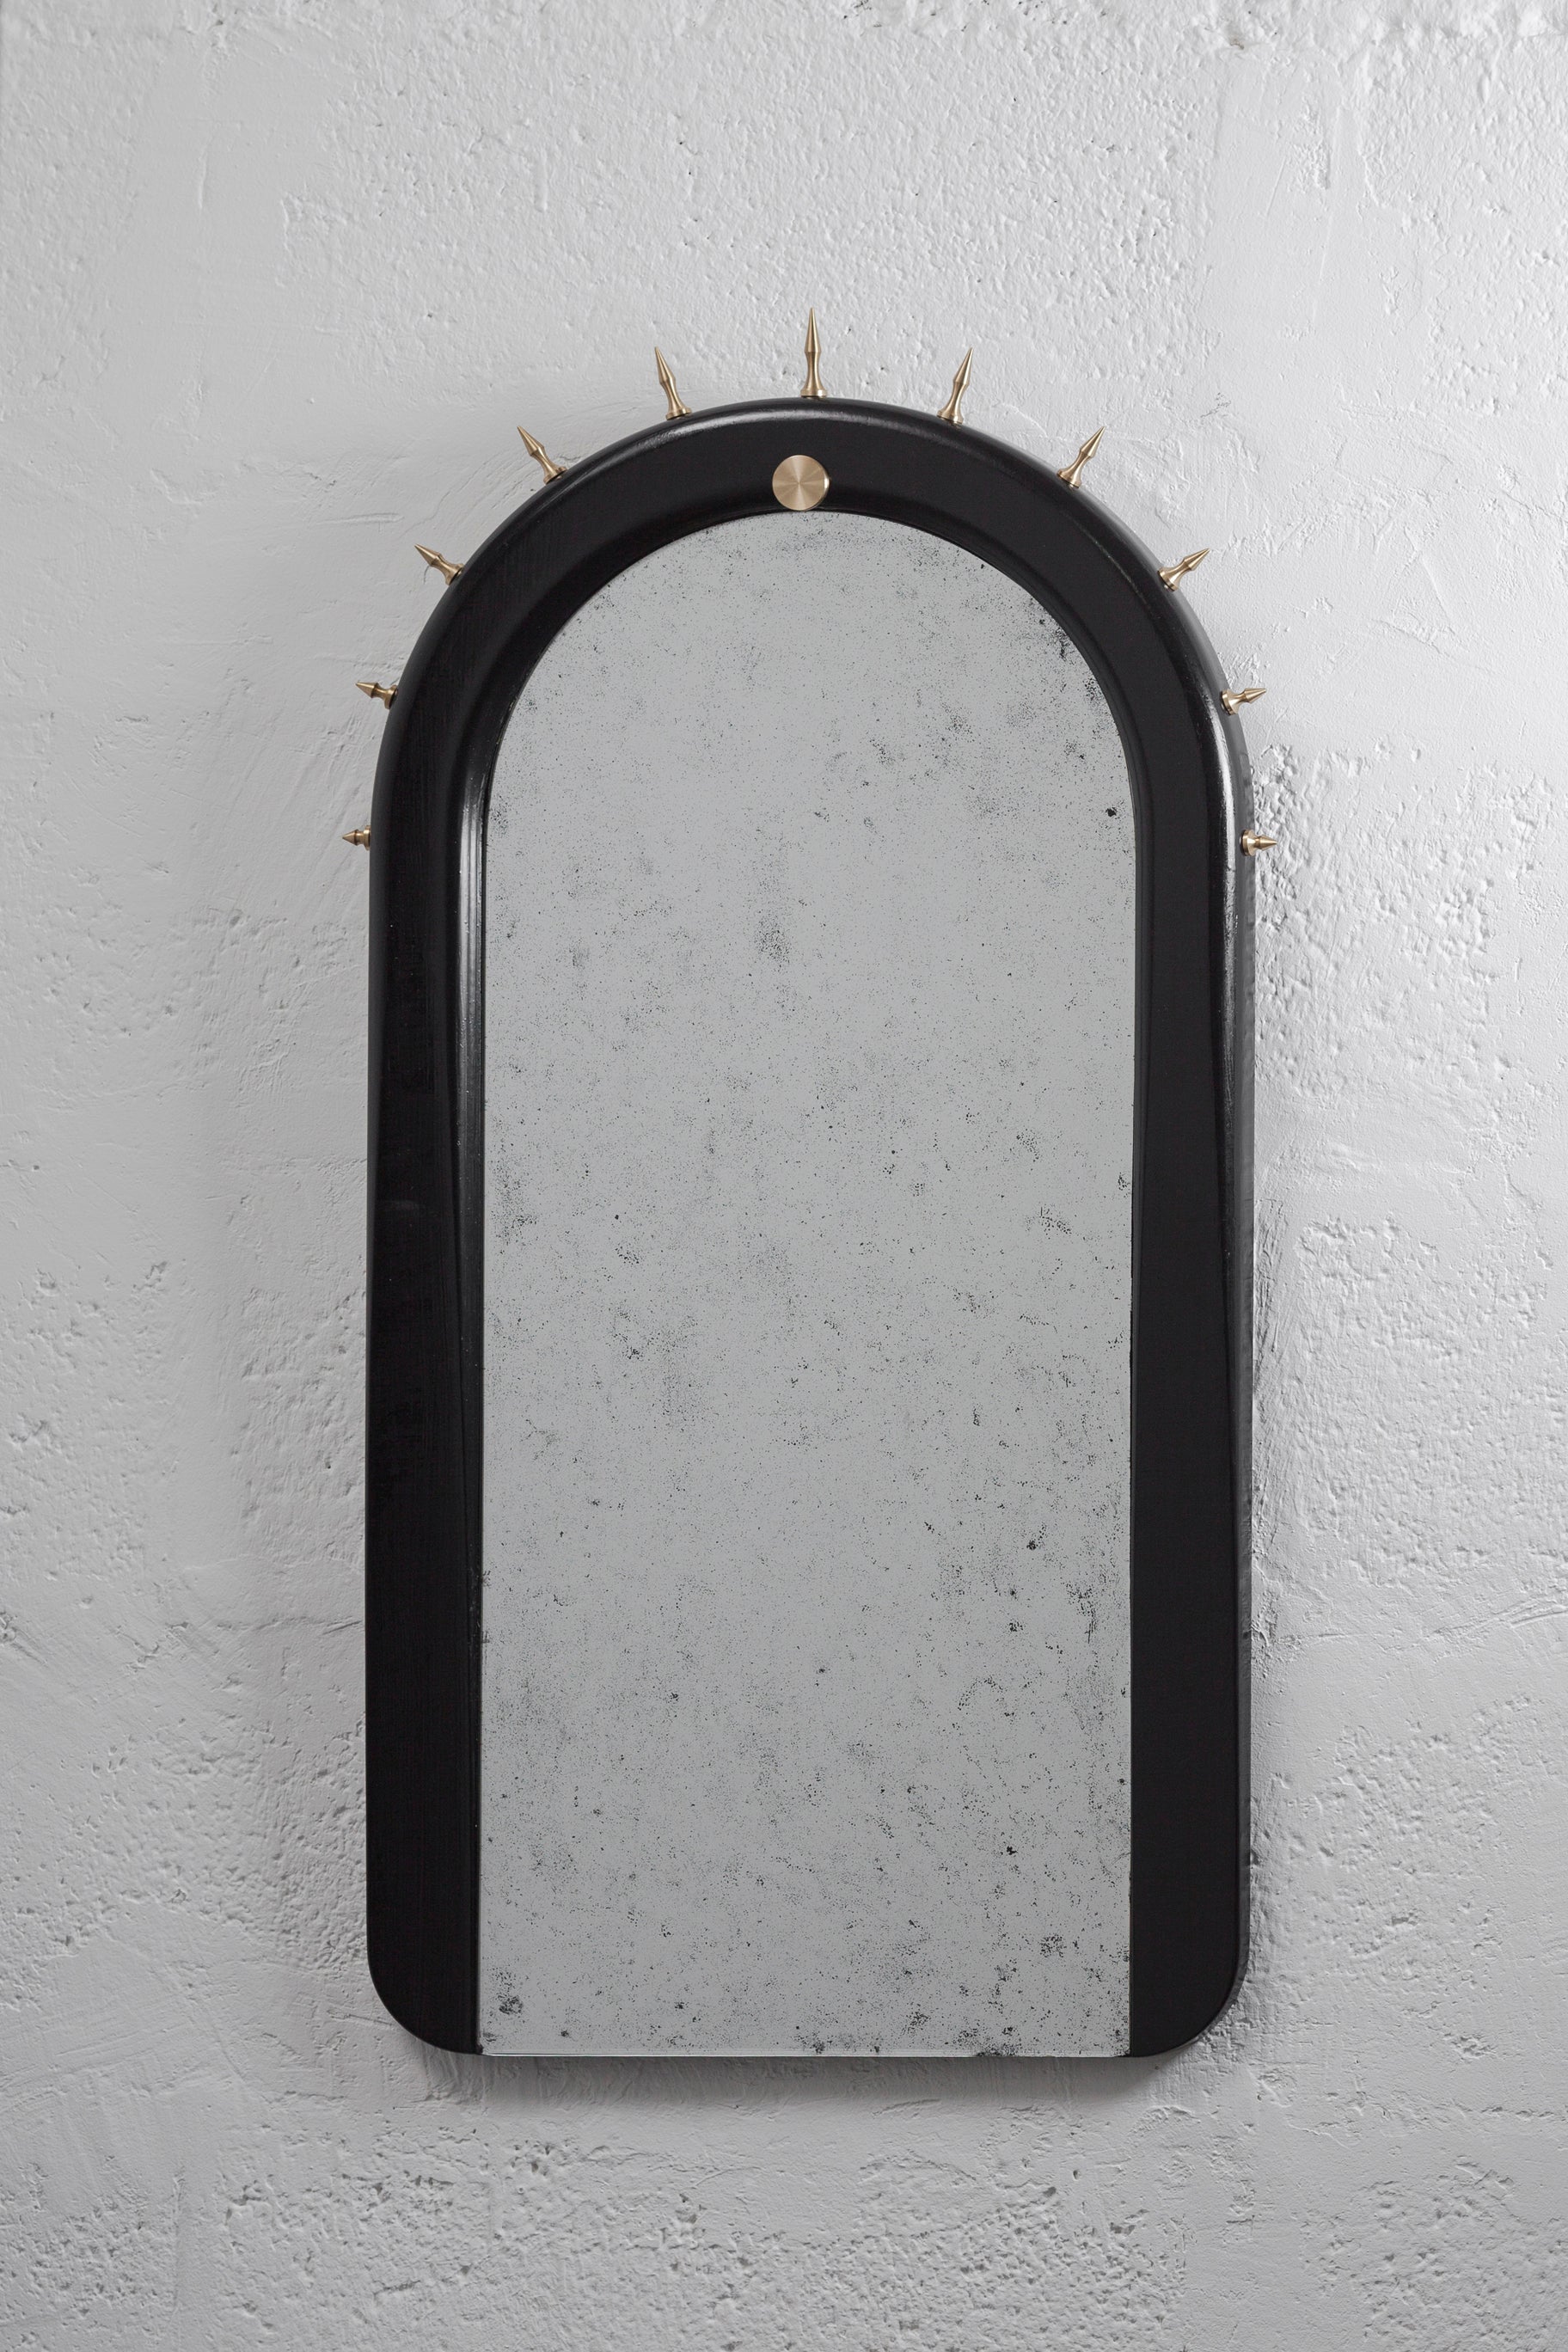 Wall mirror made of solid seike wood body with a natural oil finish, antique mirror glass, and lathed bronze or stainless steel hardware.

The SITIERA_01 wall mirror is an abstraction of the Virgen de Quito crown by Bernardo de Legarda, a Quito